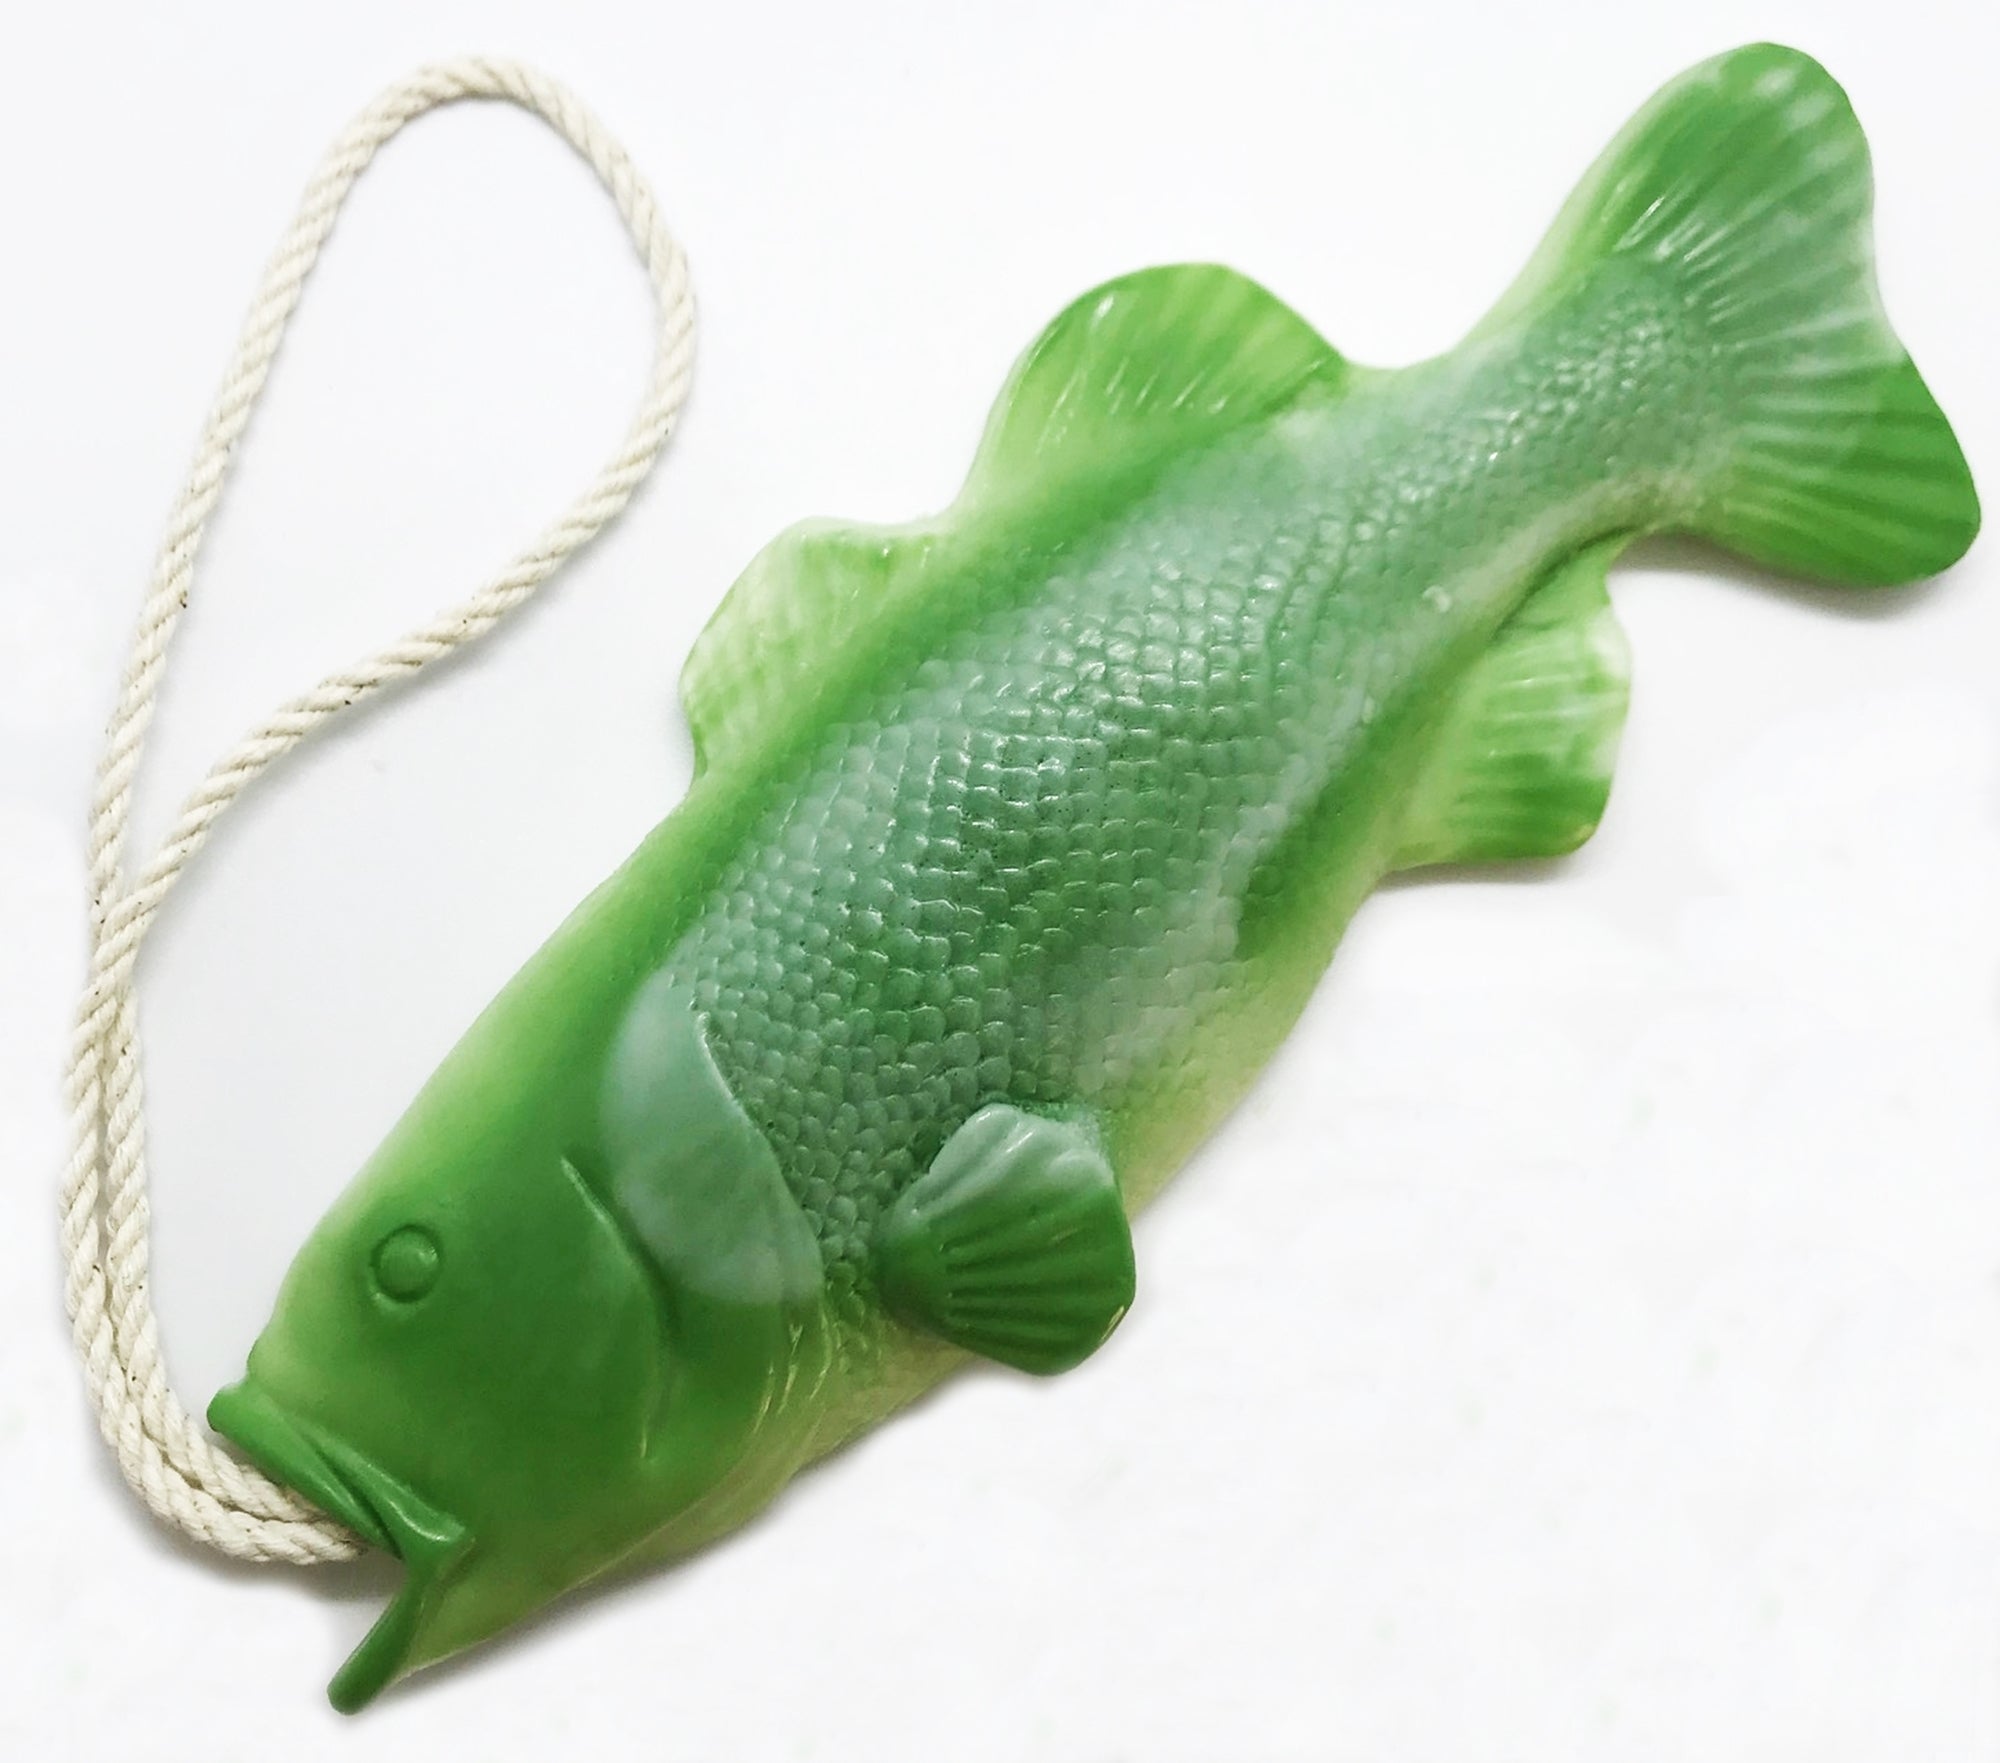 Bass Soap on a Rope, Bass Fishing Gifts, Stocking Stuffers for Men